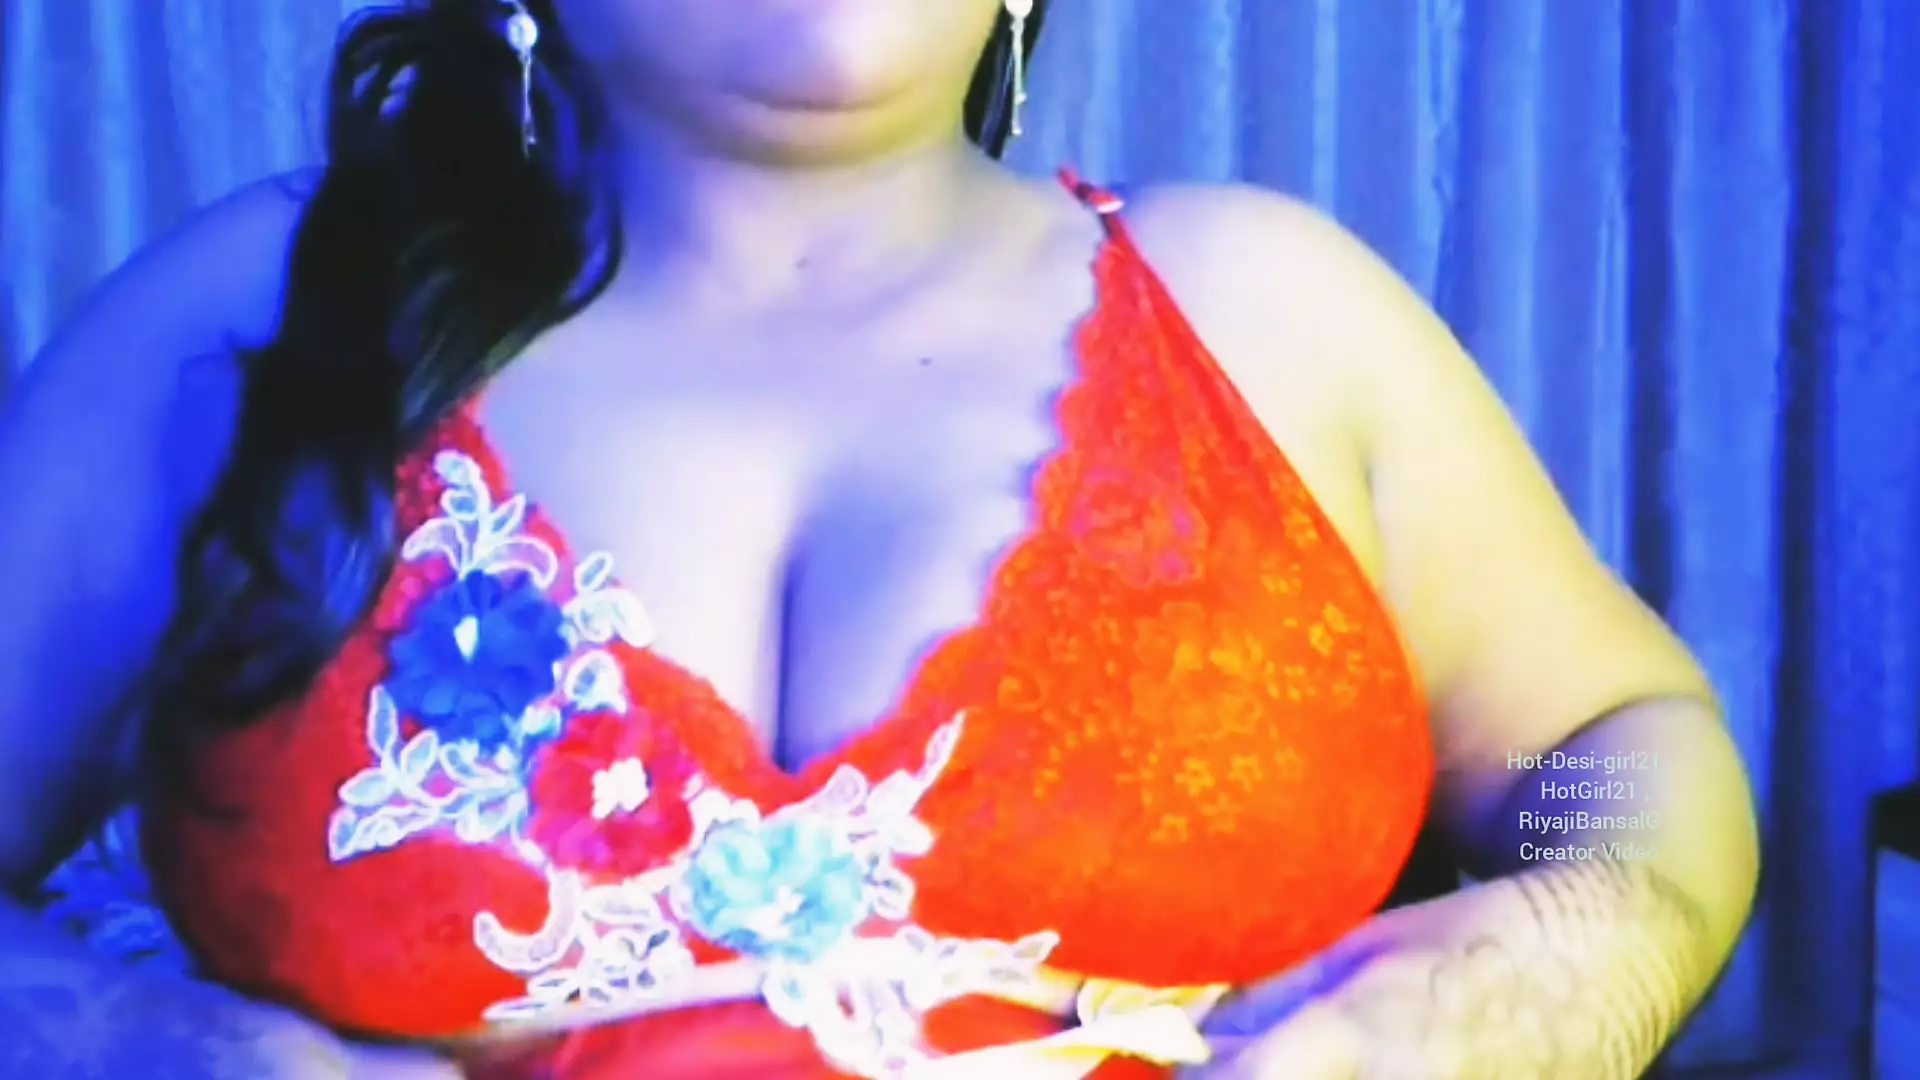 Excited Girl Riyajibansalg Hot Girl 21 in the Desire of Sex Made Online Video Call and Showed off Her Boobs and Showed image